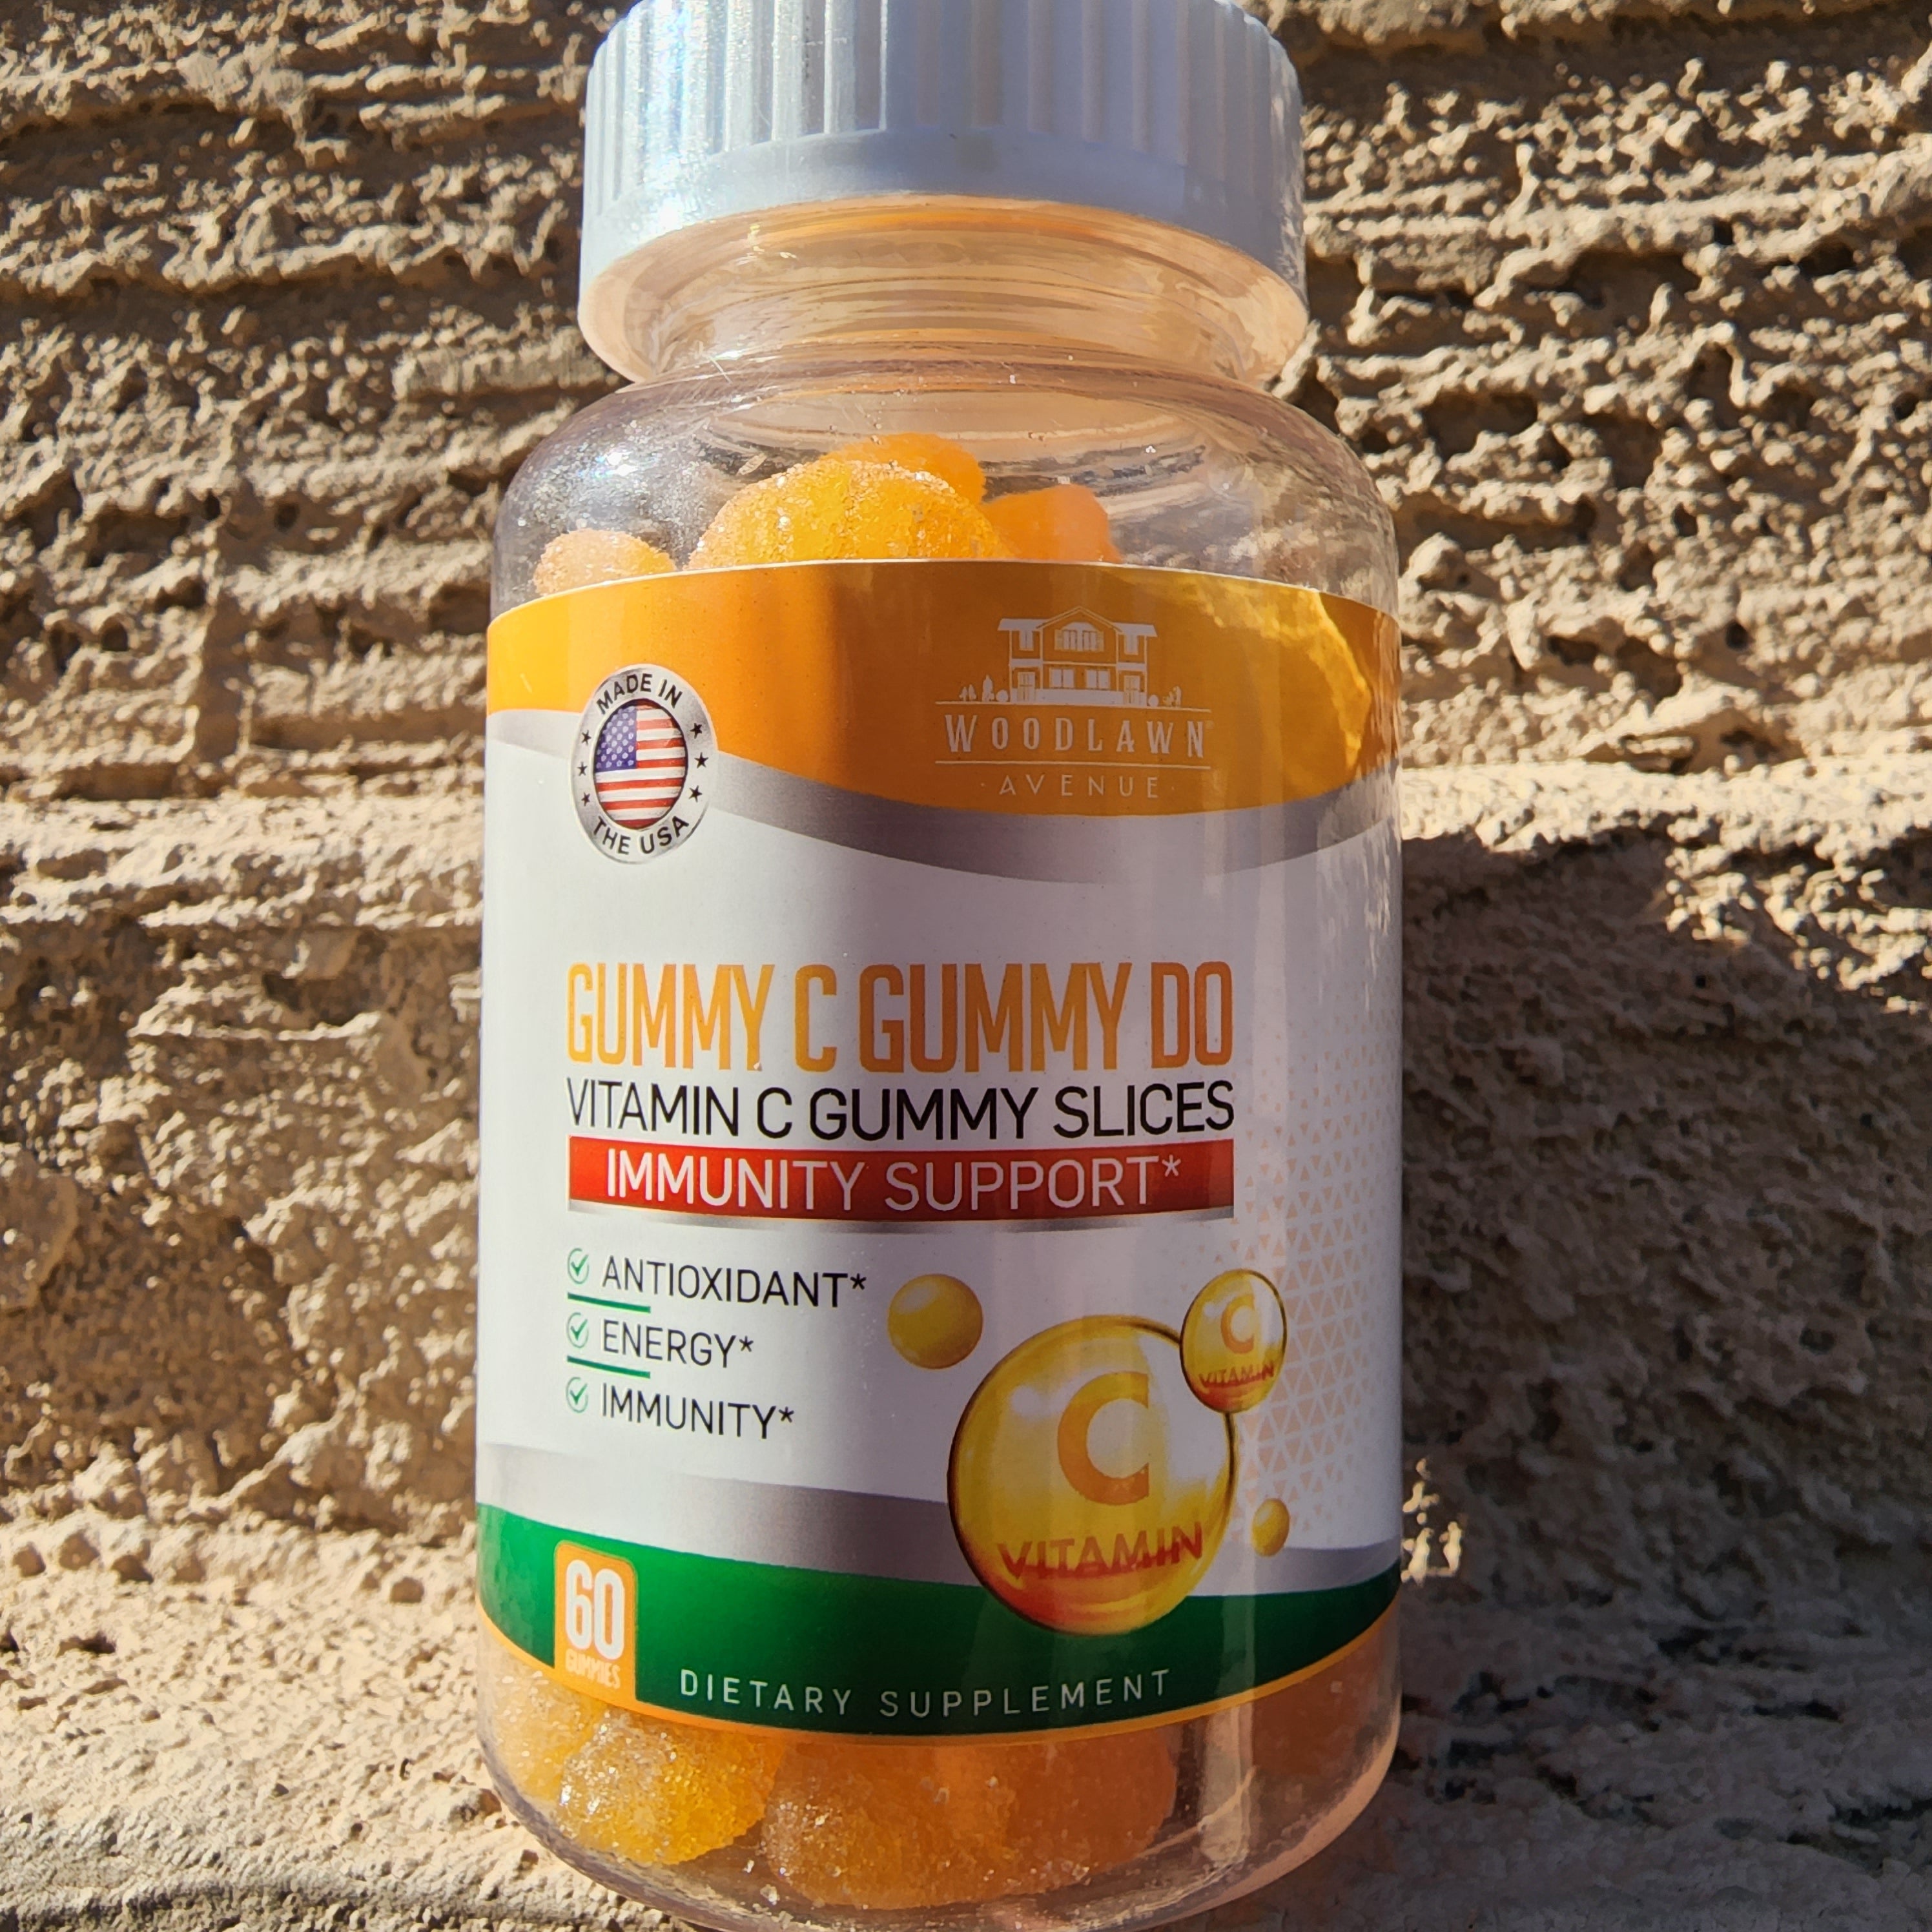 Gummy C Gummy Do - Vitamin C Gummies Antioxidant; Promotes Collagen Synthesis Maintains Bones, Skin, and Blood Vessels Supports Healthy Immune System.